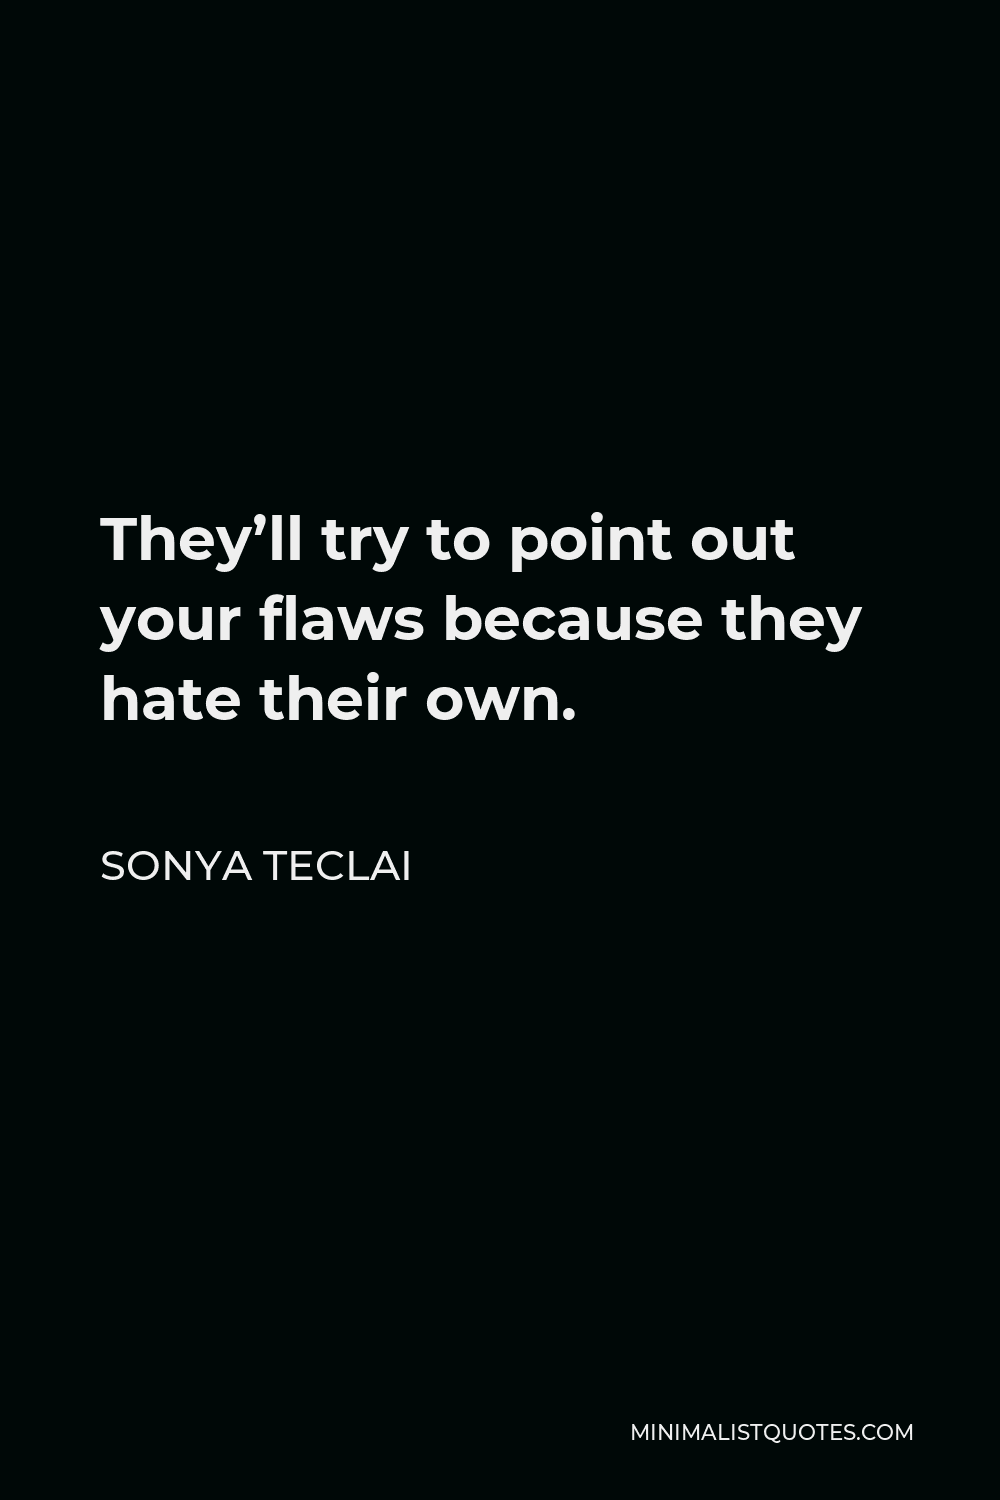 Sonya Teclai Quote - They’ll try to point out your flaws because they hate their own.